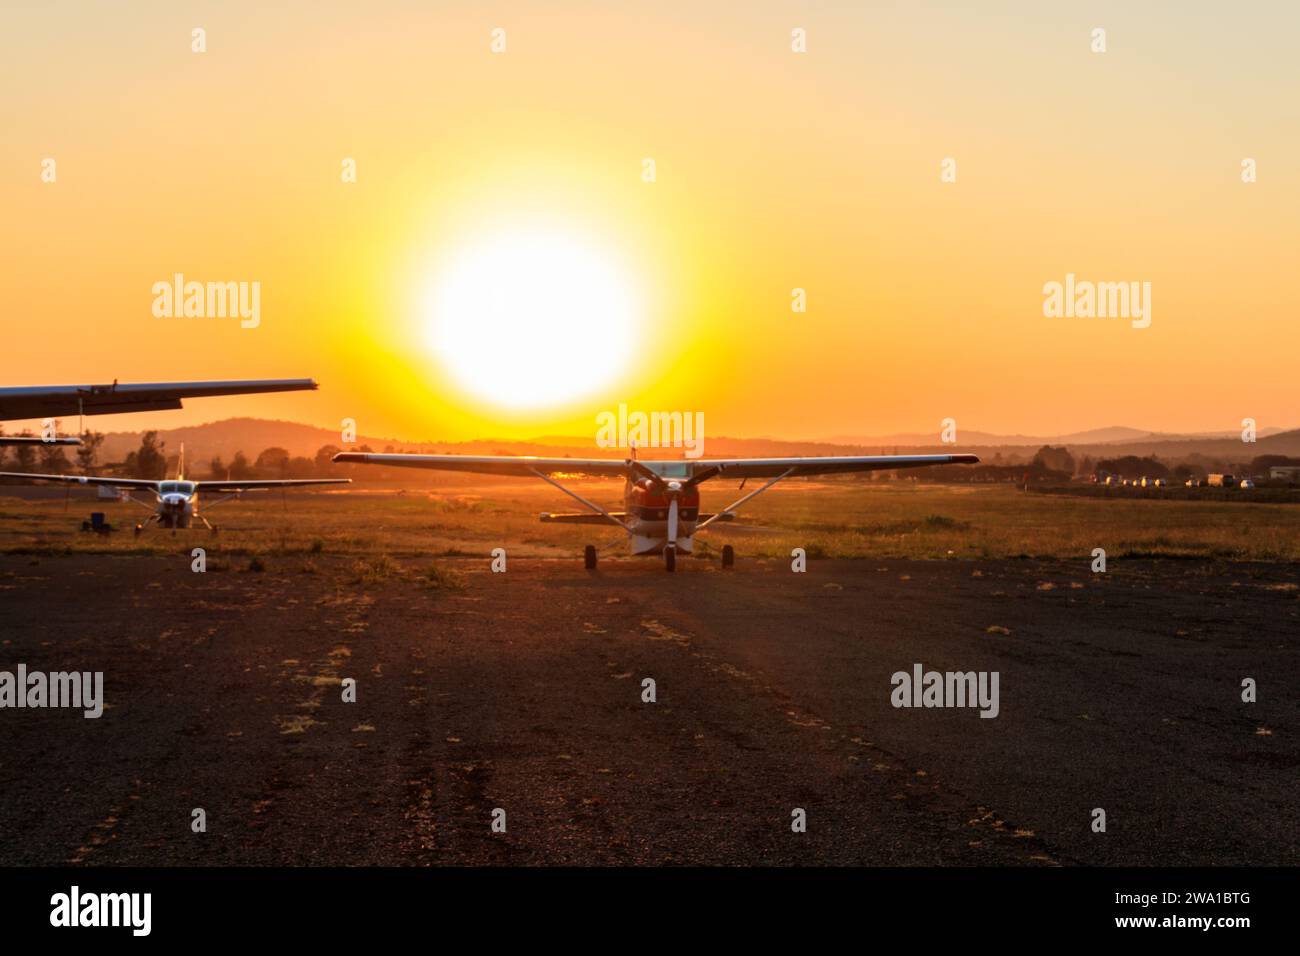 Small propeller airplanes at sunset in Arusha airport, Tanzania Stock Photo